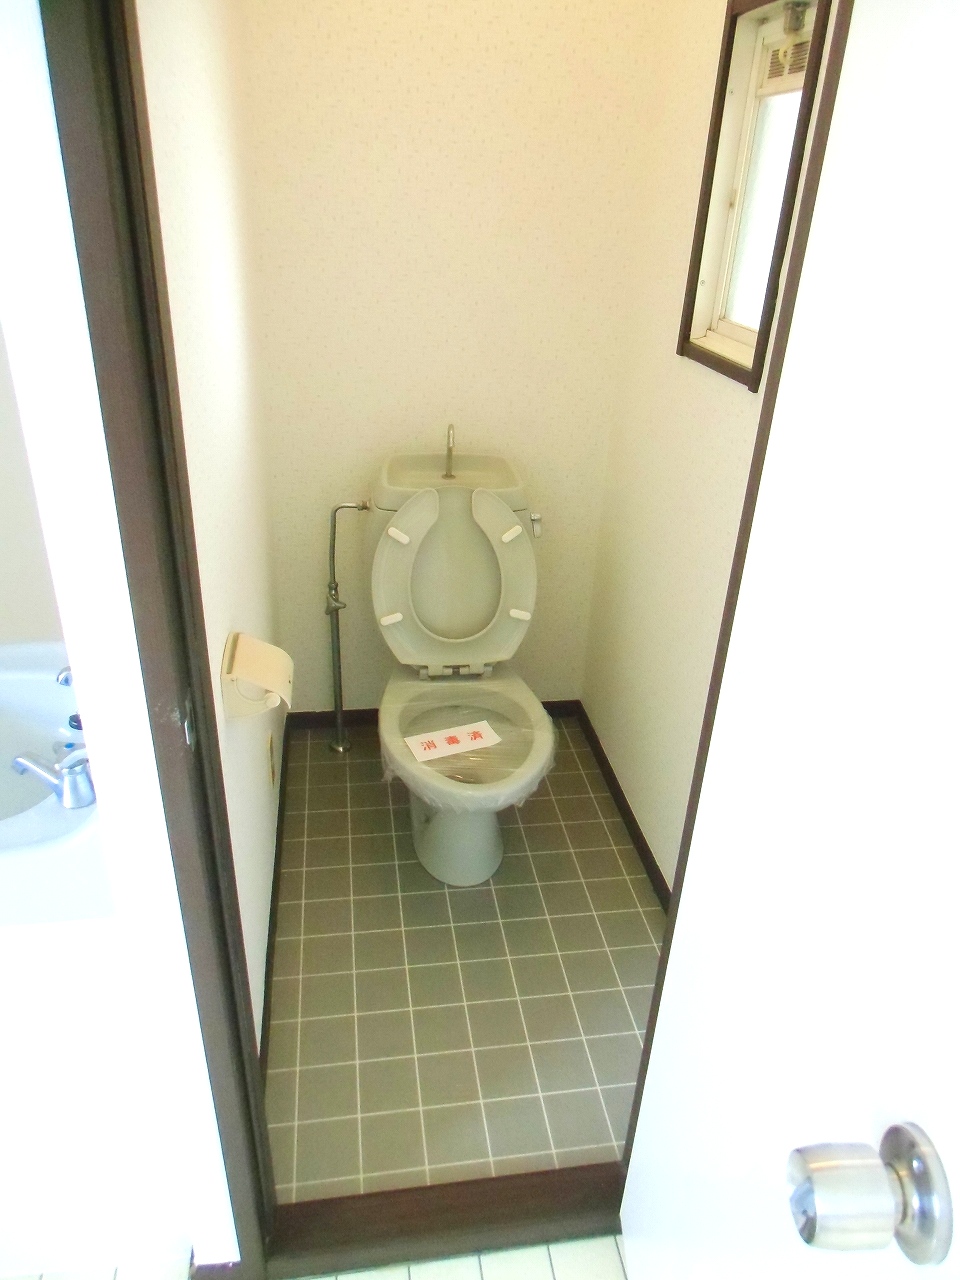 Toilet. It will be Western-style flush toilet